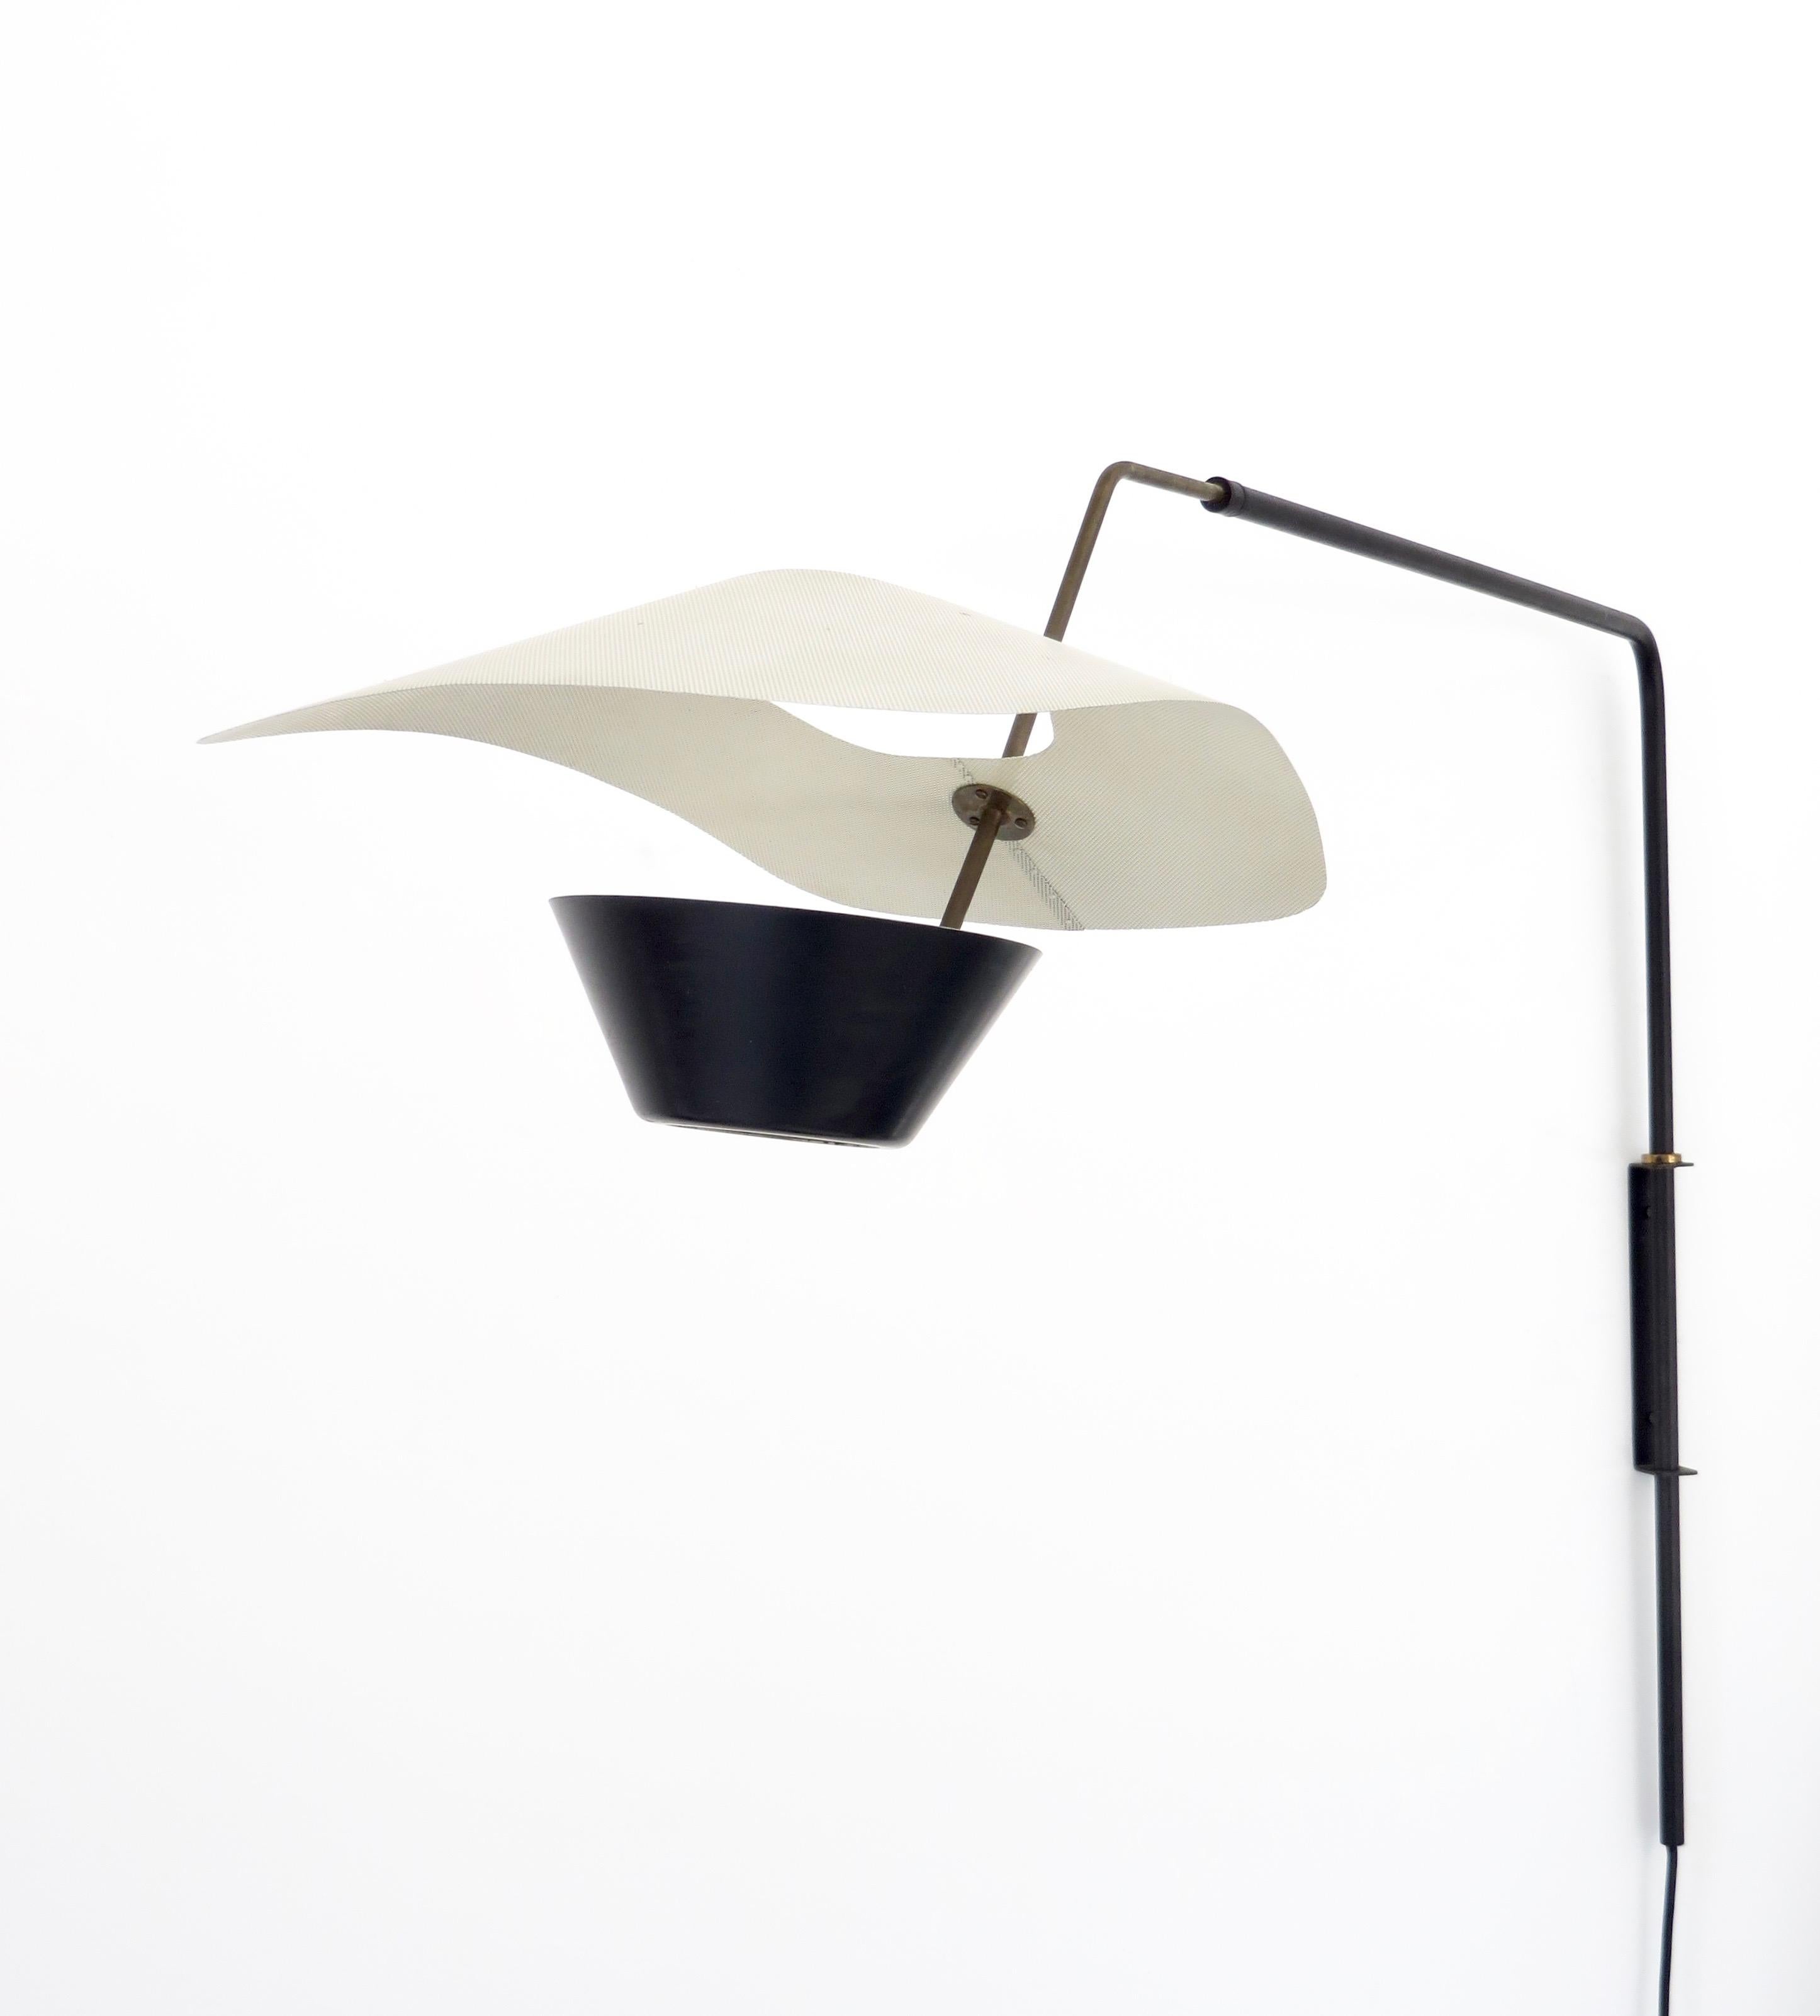 Mid-Century Modern Kite Cerf Volant Applique Wall Light by Pierre Guariche Editioned by Disderot